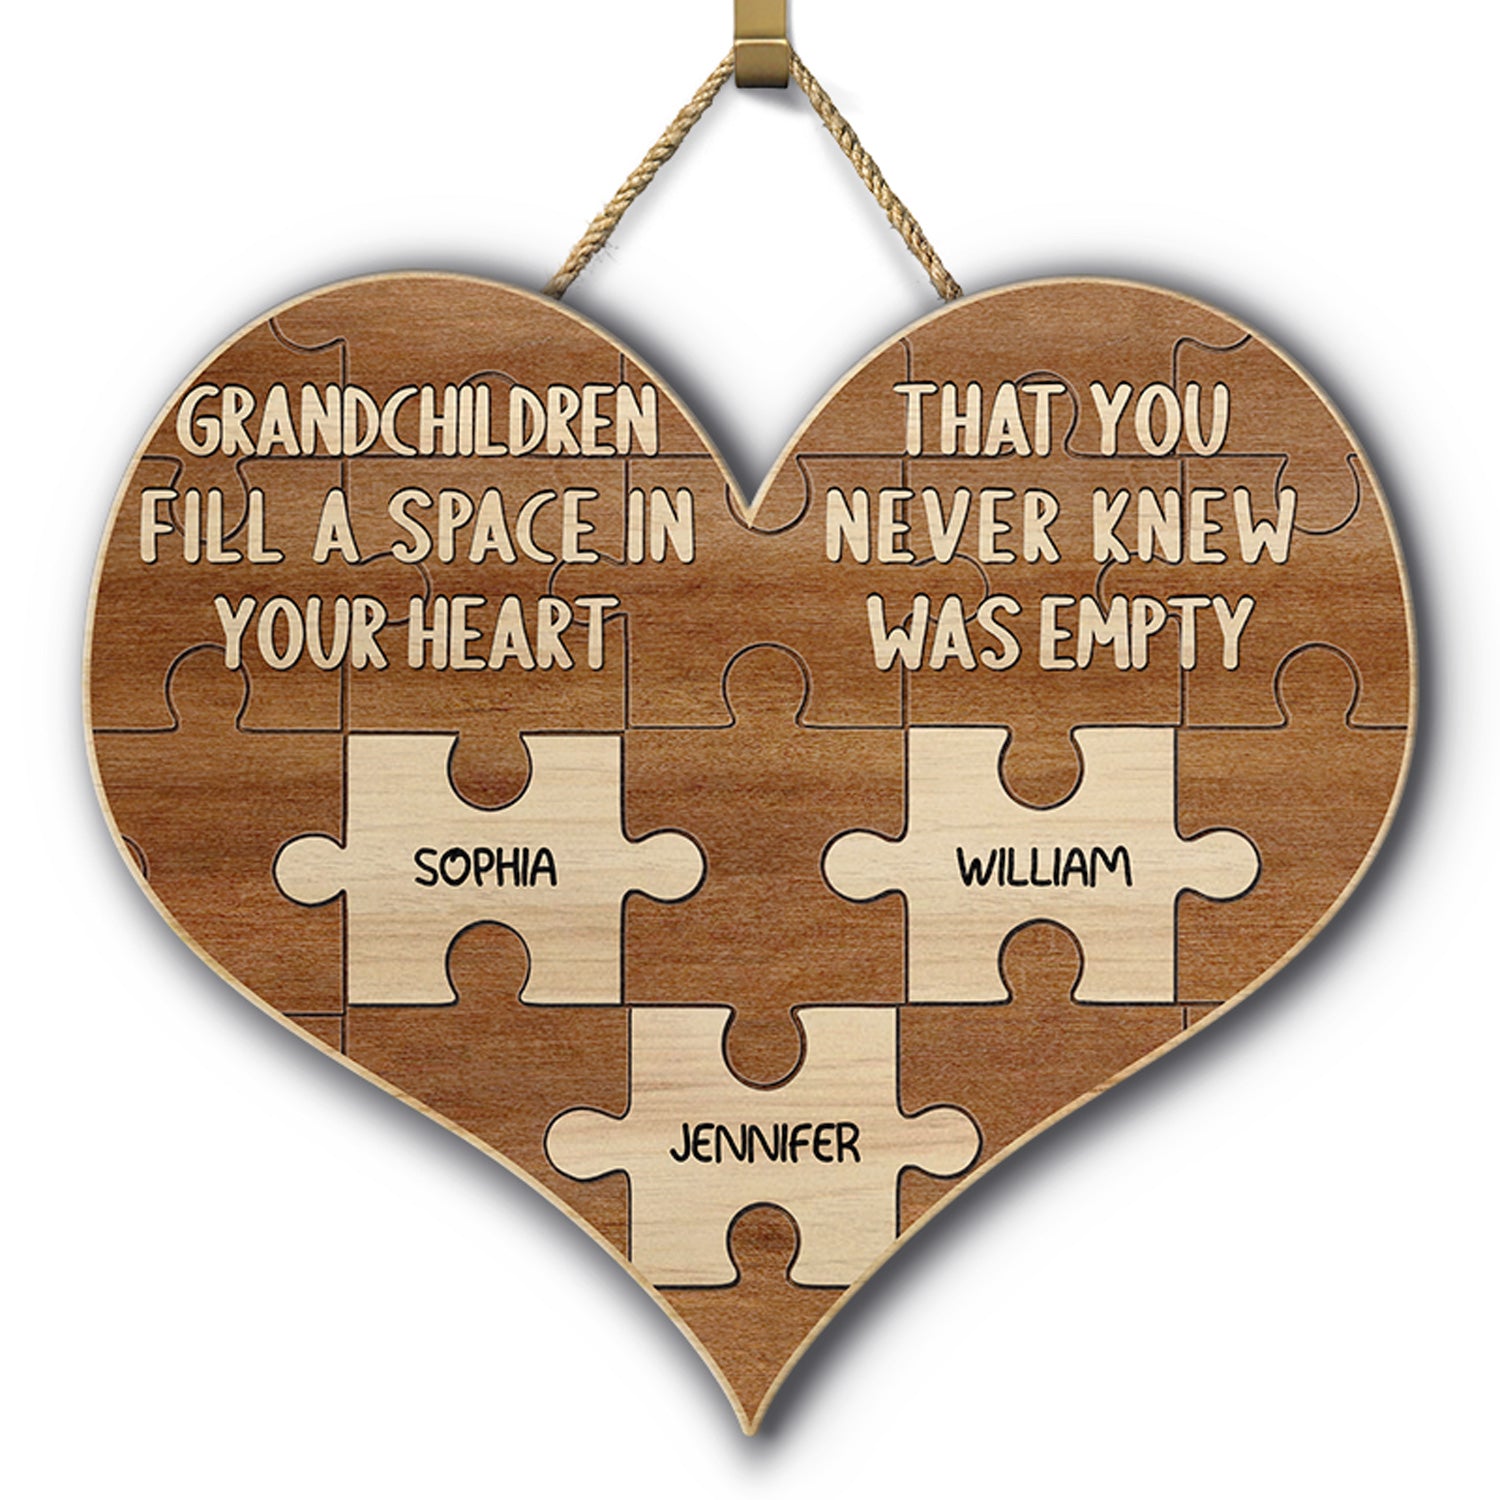 Grandchildren Fill A Space In Your Heart Puzzle - Birthday, Loving Gift For Mom, Mother, Mama, Grandma, Grandmother - Personalized Custom Shaped Wood Sign